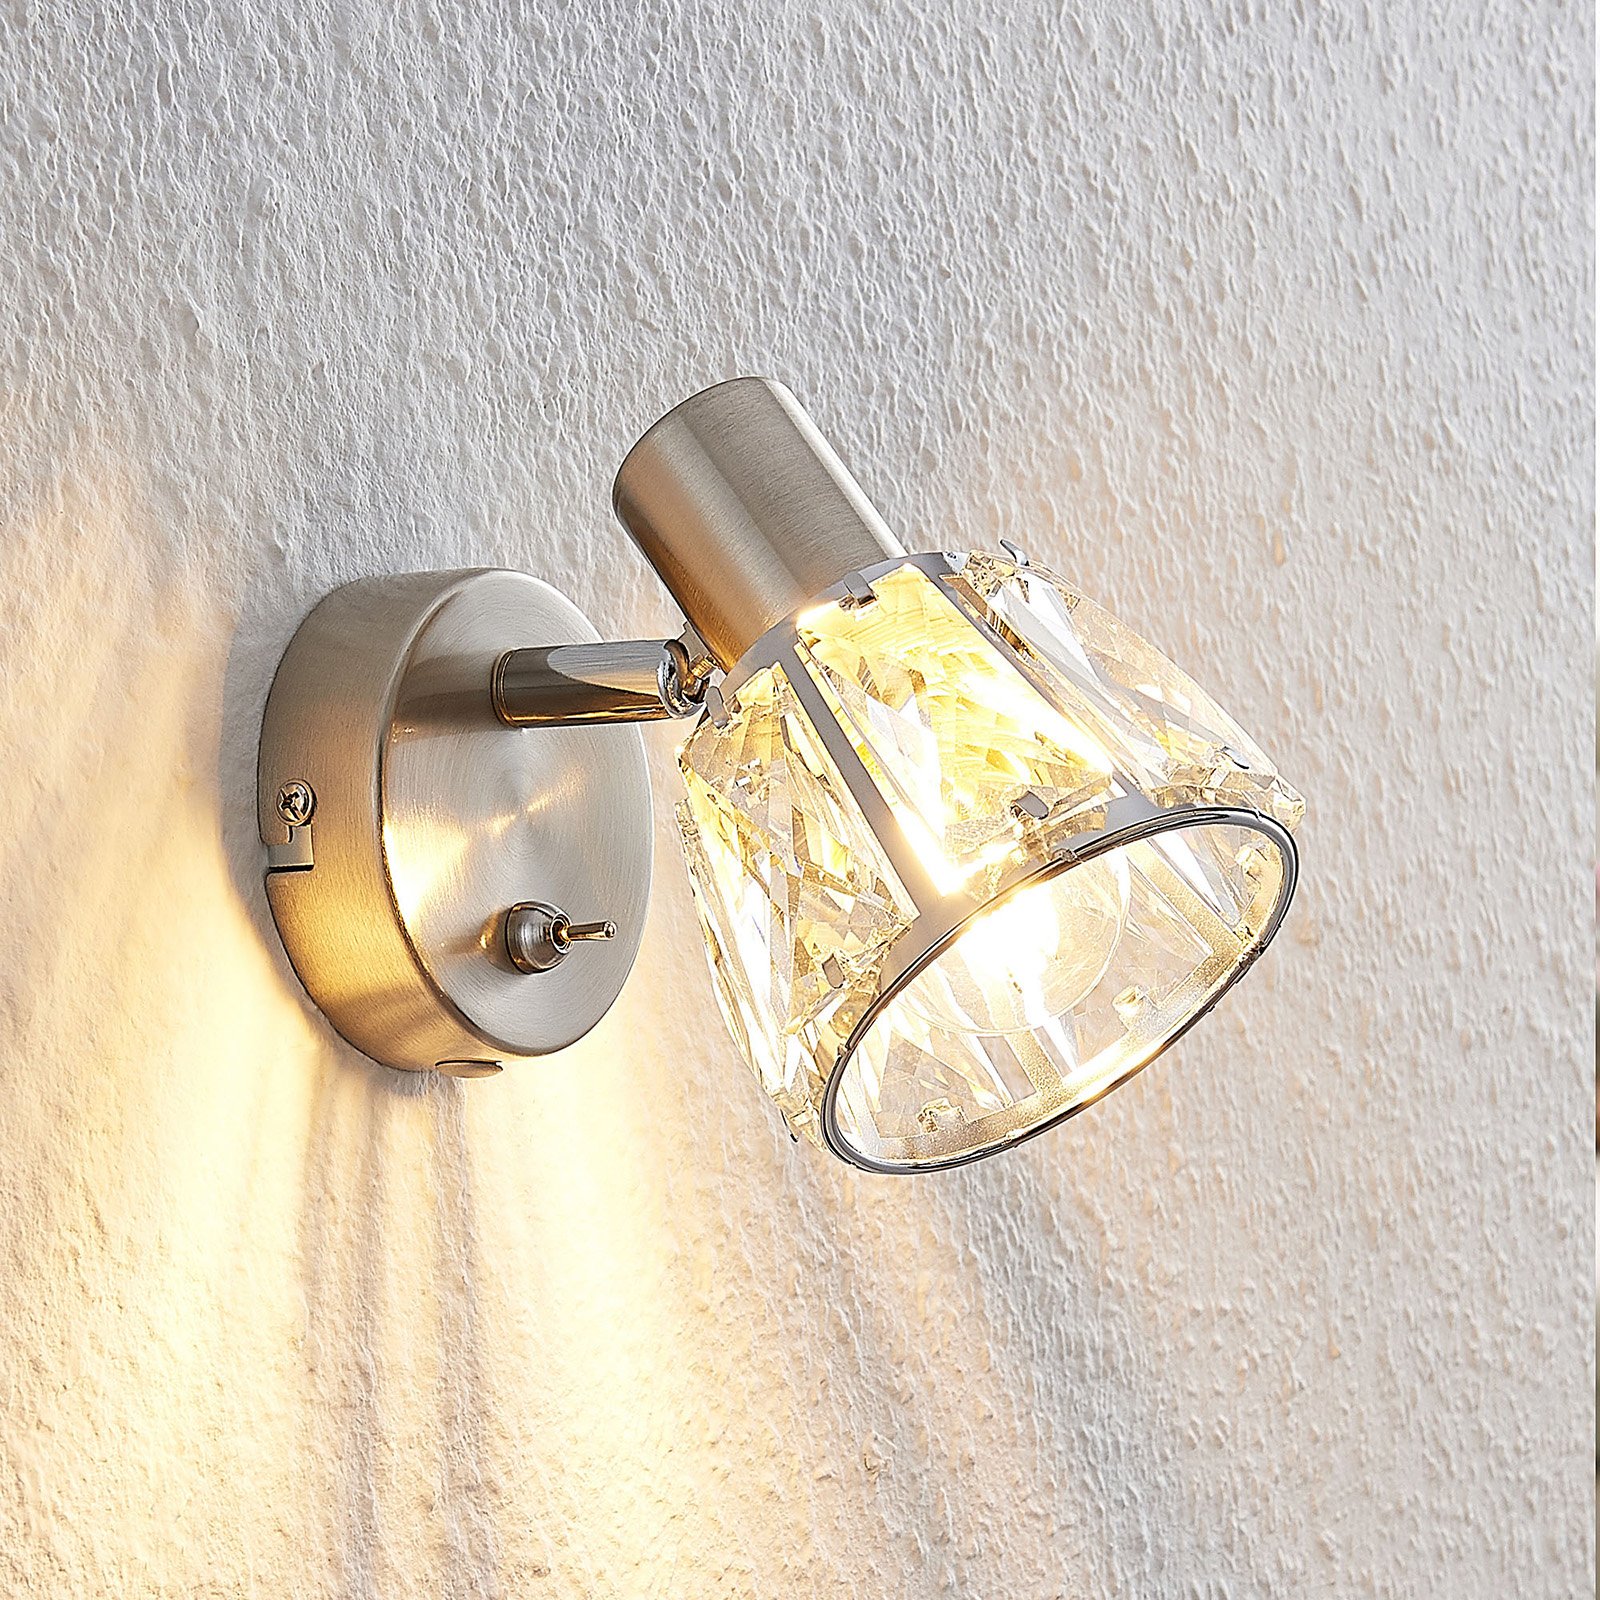 Lindby Kosta wall light with switch, nickel